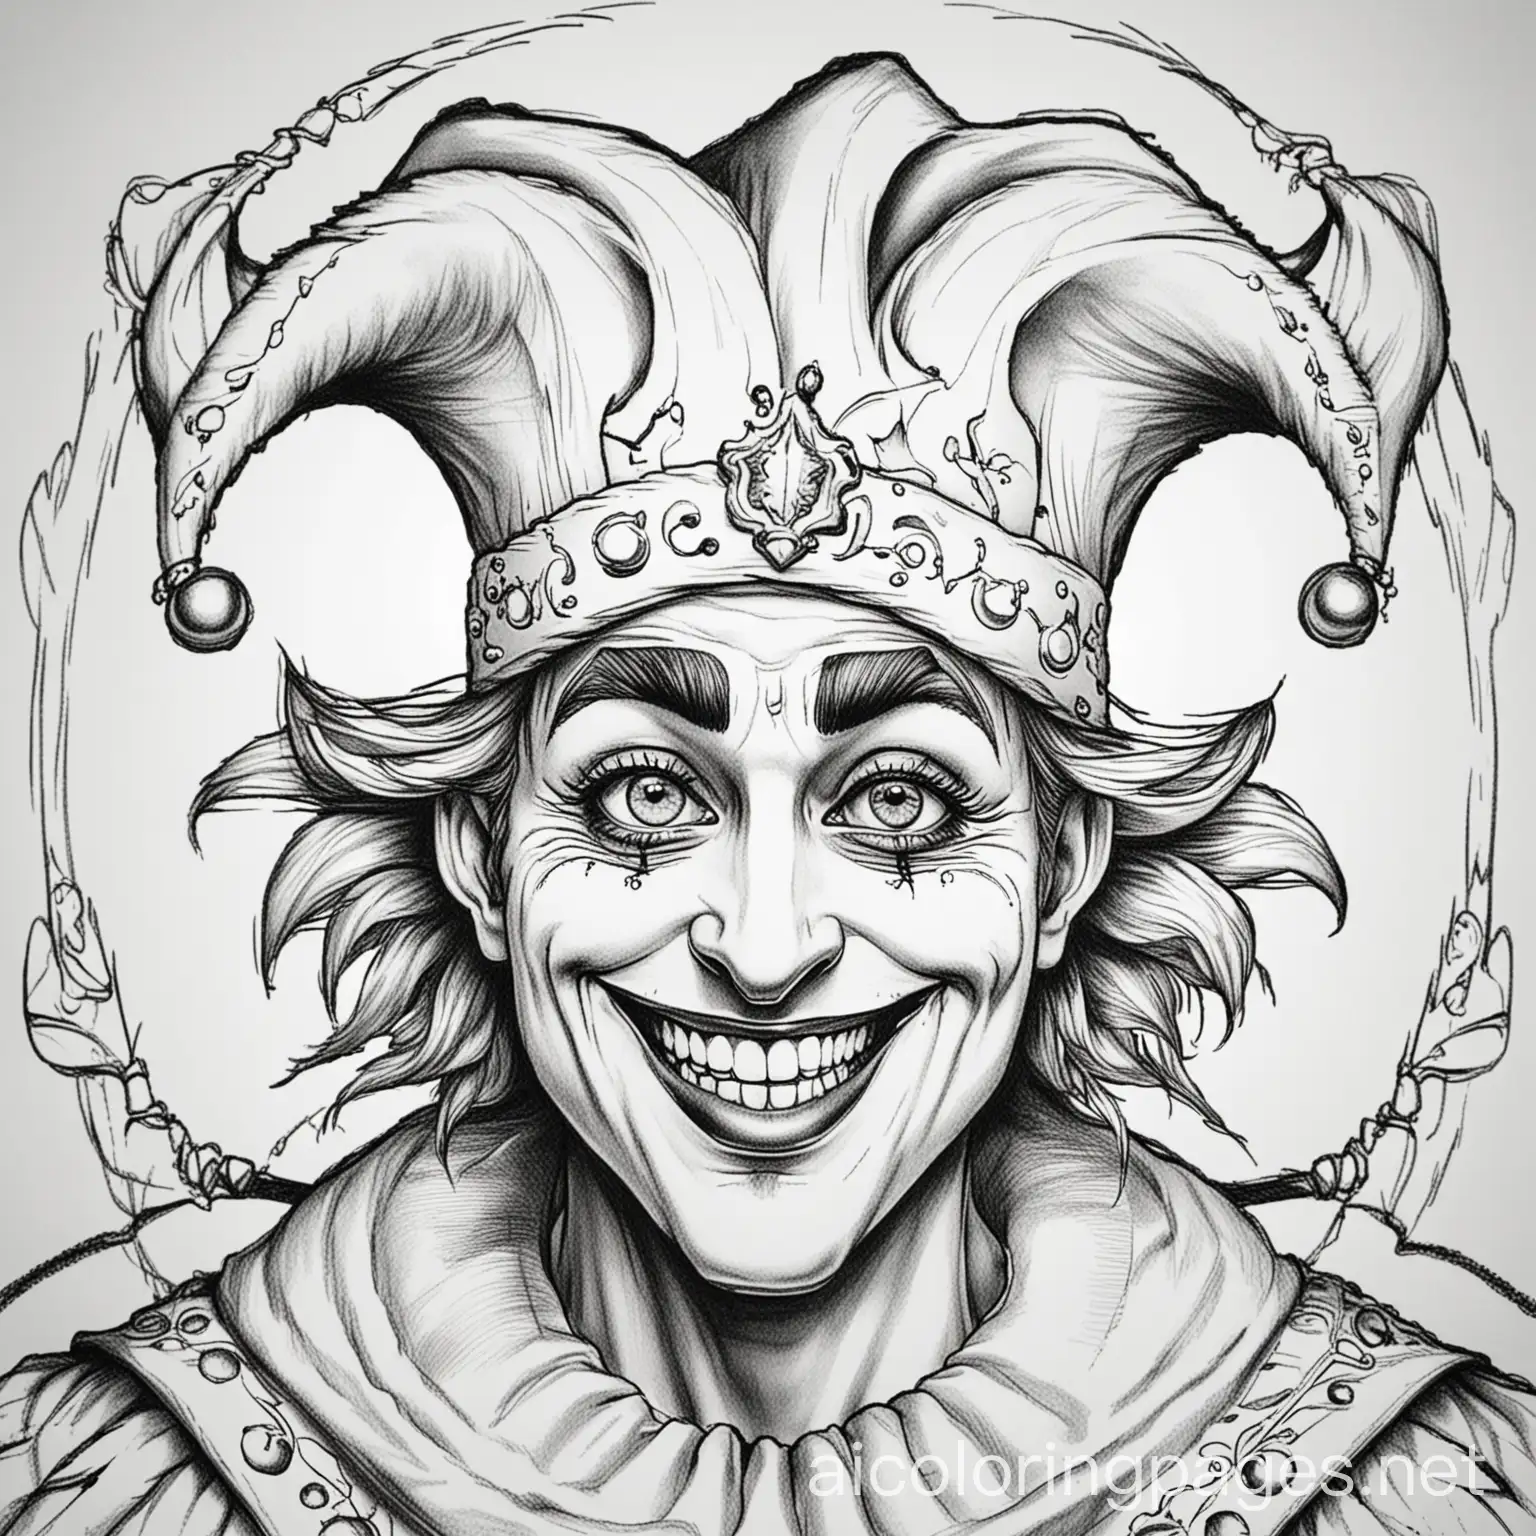 Childrens-Coloring-Page-Simple-Jester-Joker-Design-for-Easy-Coloring